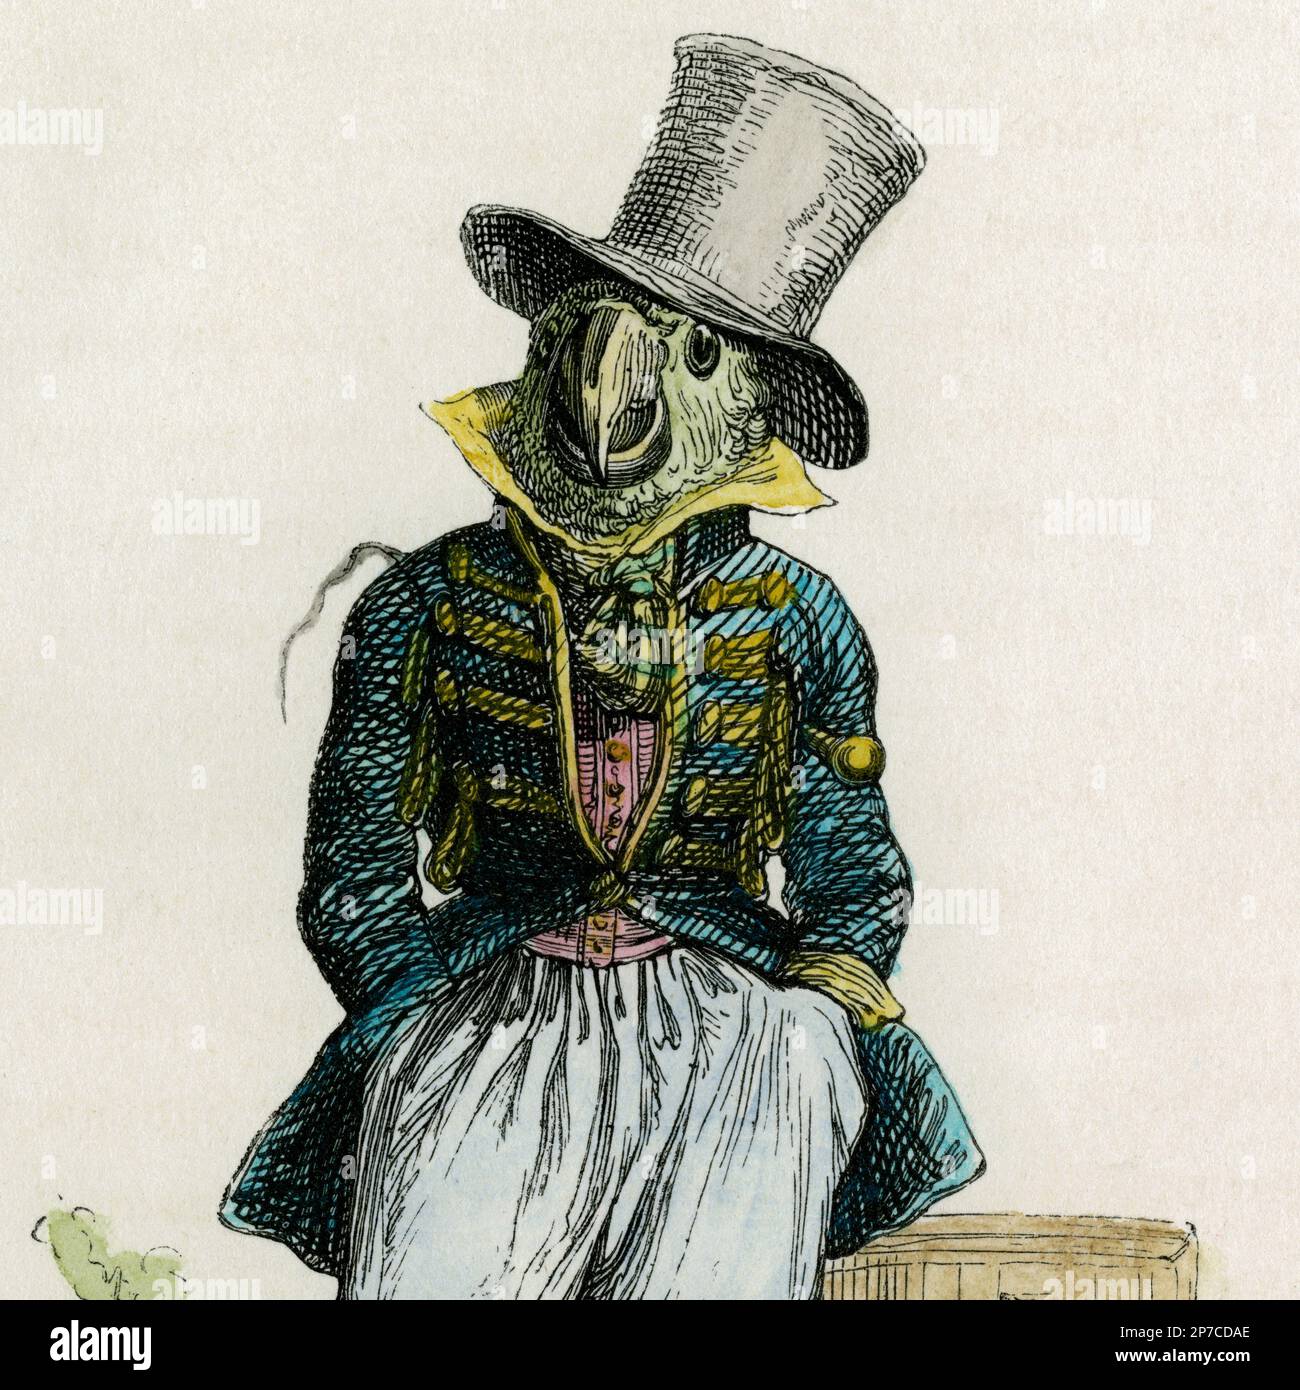 A parrot’s head on human shoulders: square format detail of hand-tinted image of birdman in top hat and military frock, a 19th century satirical wood engraving by Jean Ignace Isidore Gérard (1803-1847), better known as J.J. Grandville.  From ‘Scenes of the Private and Public Life of Animals’ (Paris, 1842), in which he depicted many more animals in human dress. Stock Photo